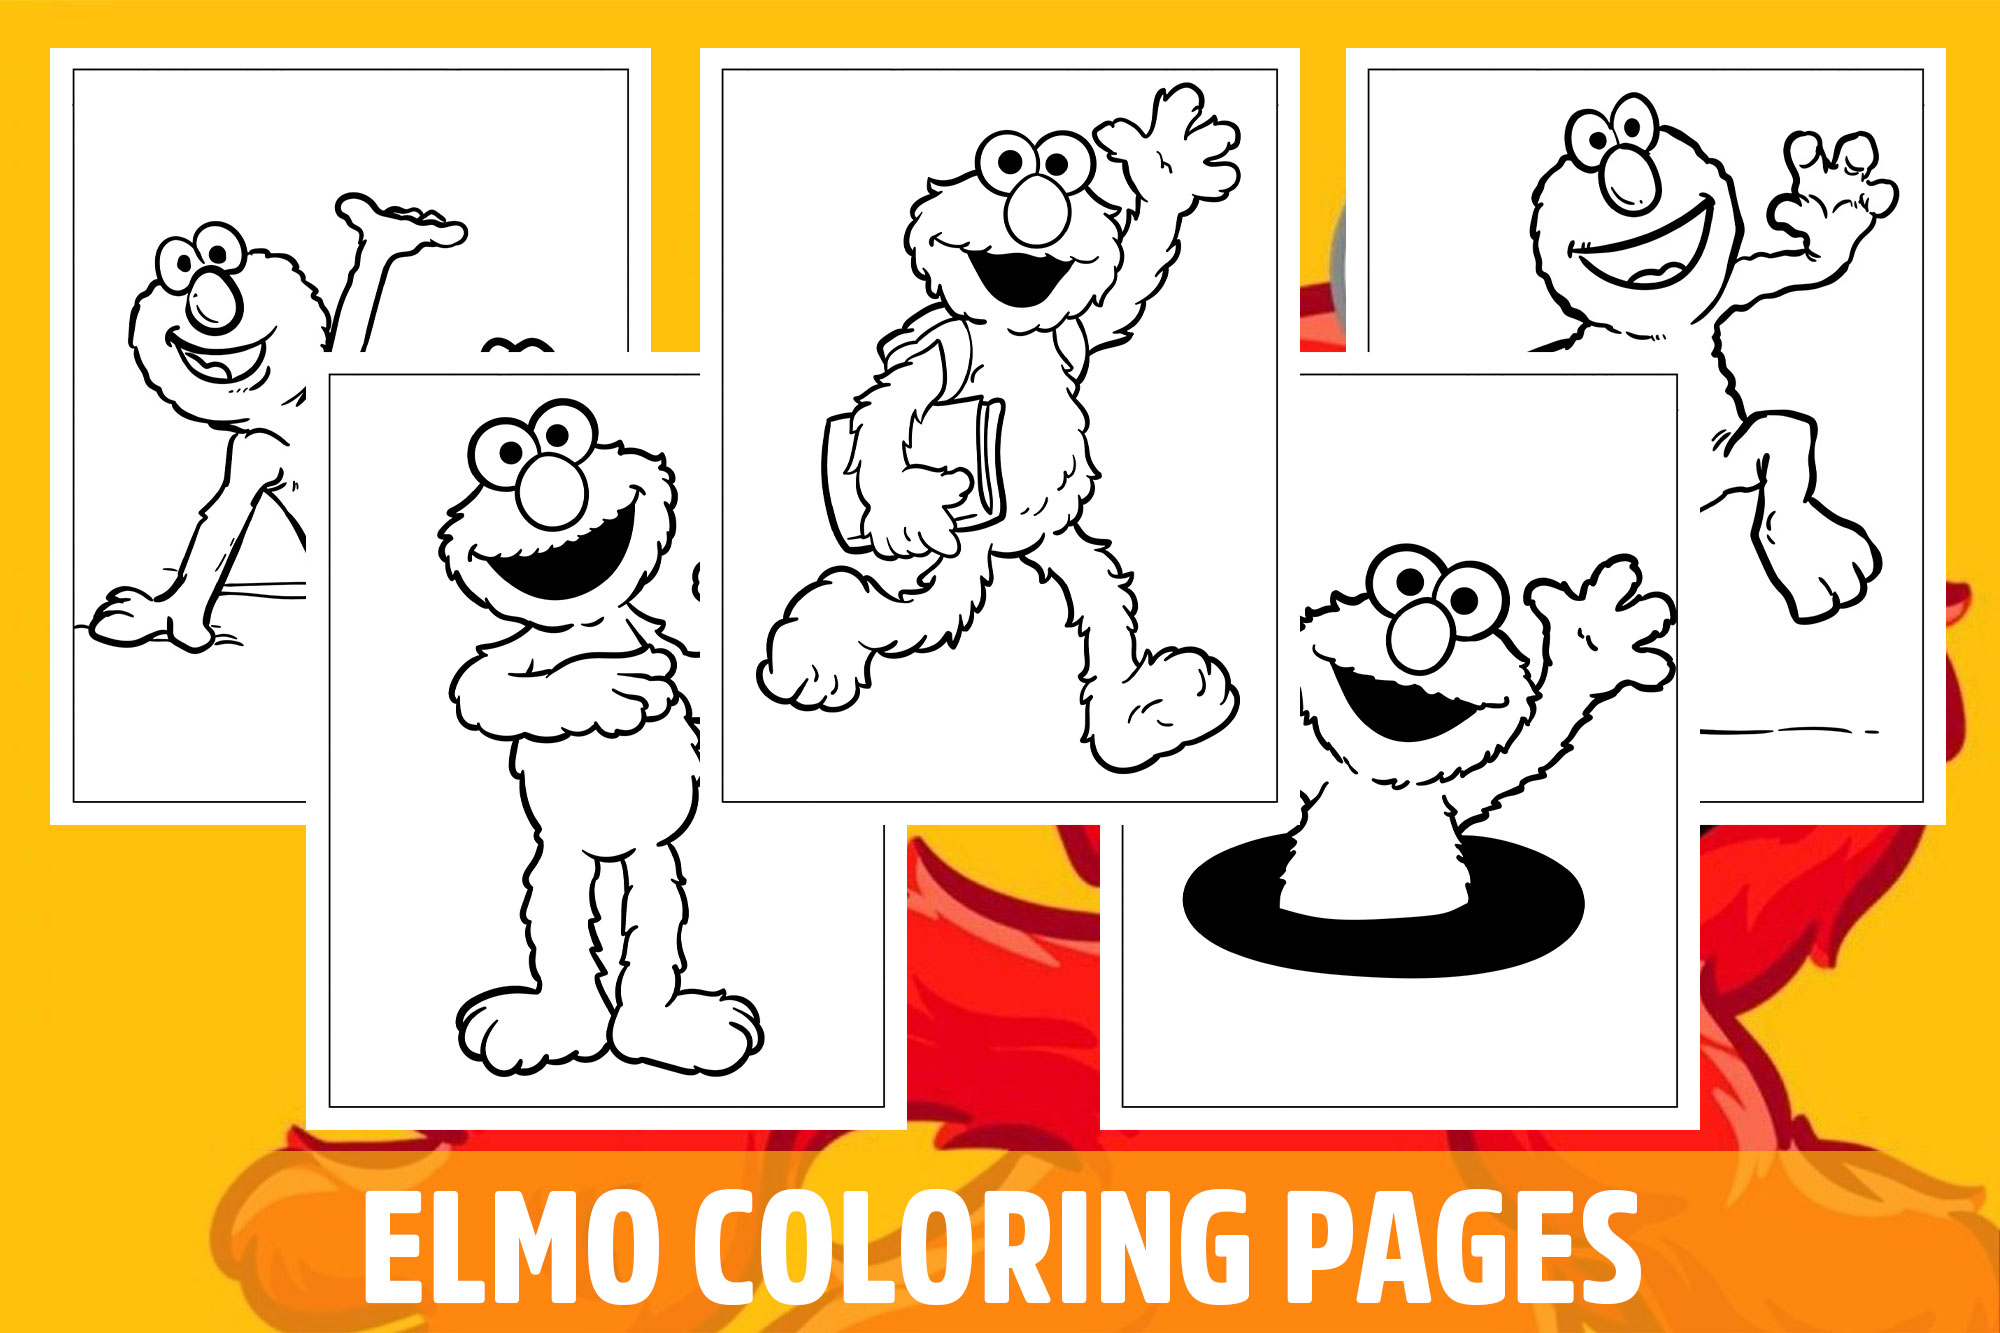 Elmo coloring pages for kids girls boys teens birthday school activity made by teachers